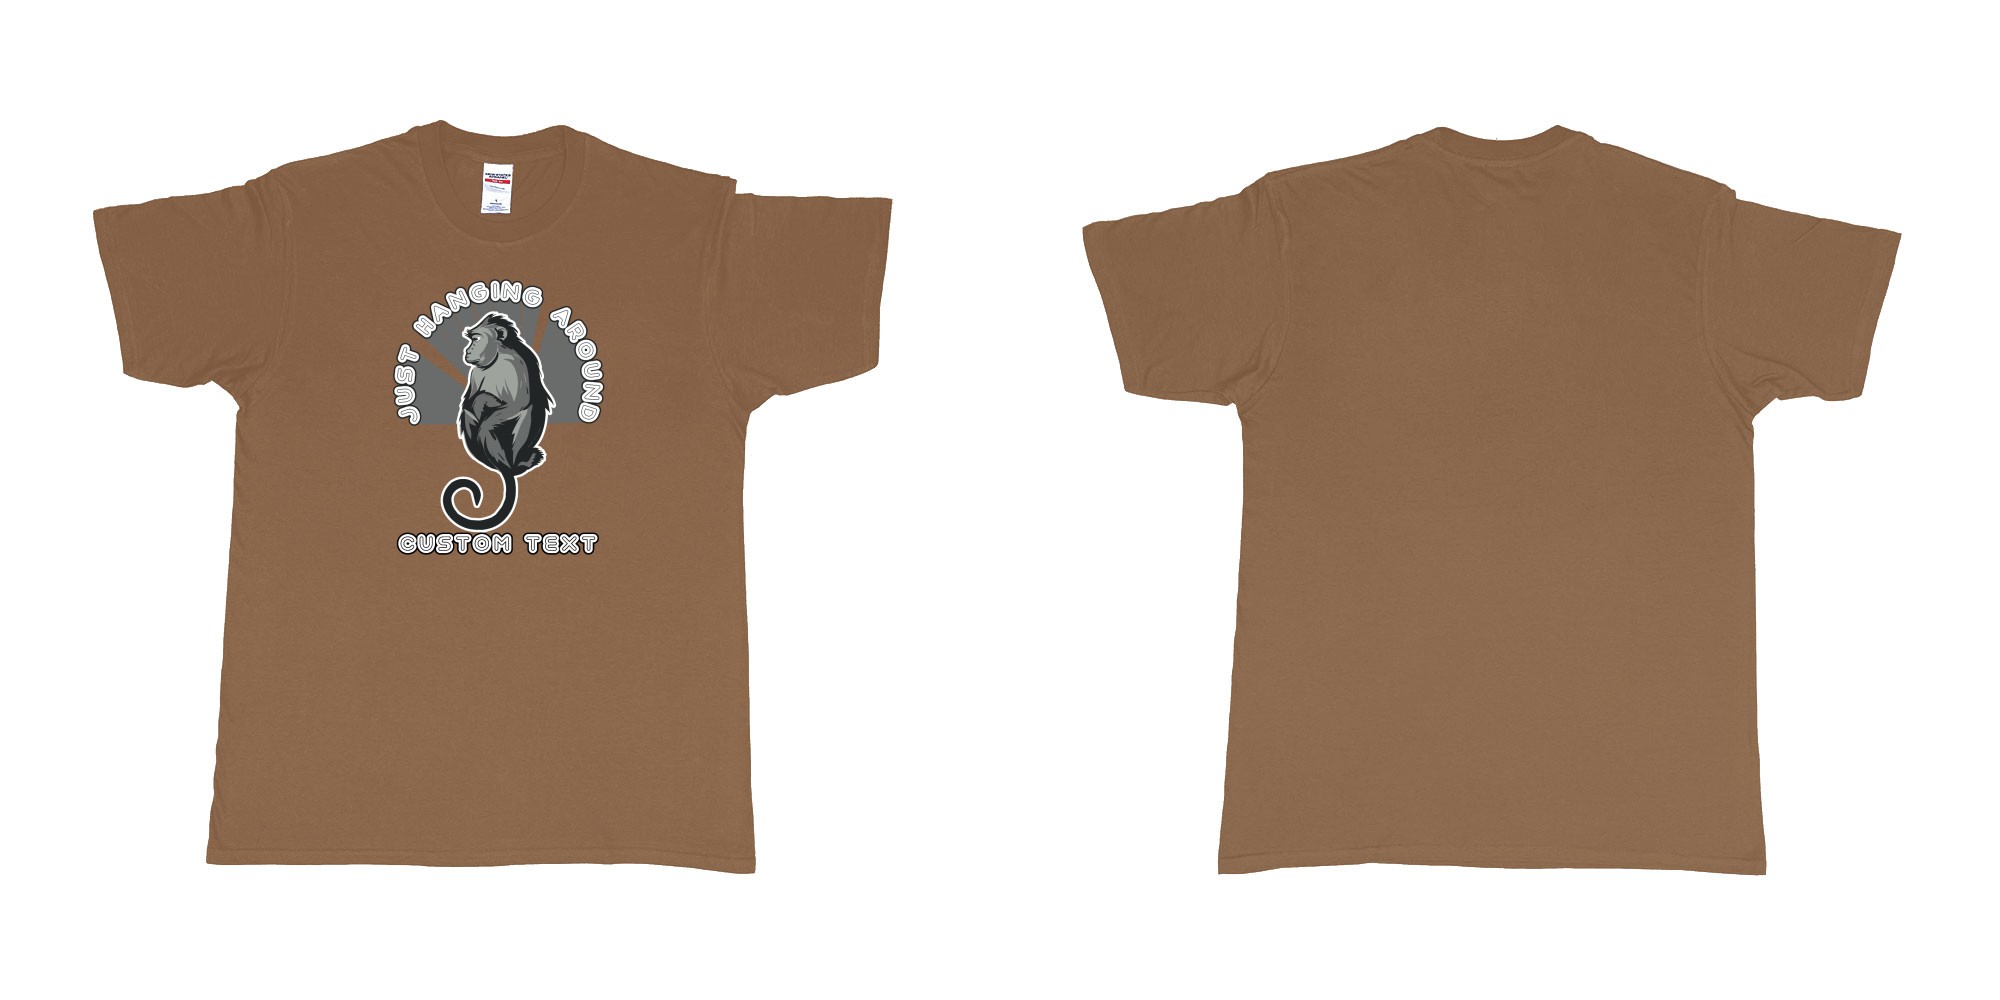 Custom tshirt design  in fabric color chestnut choice your own text made in Bali by The Pirate Way